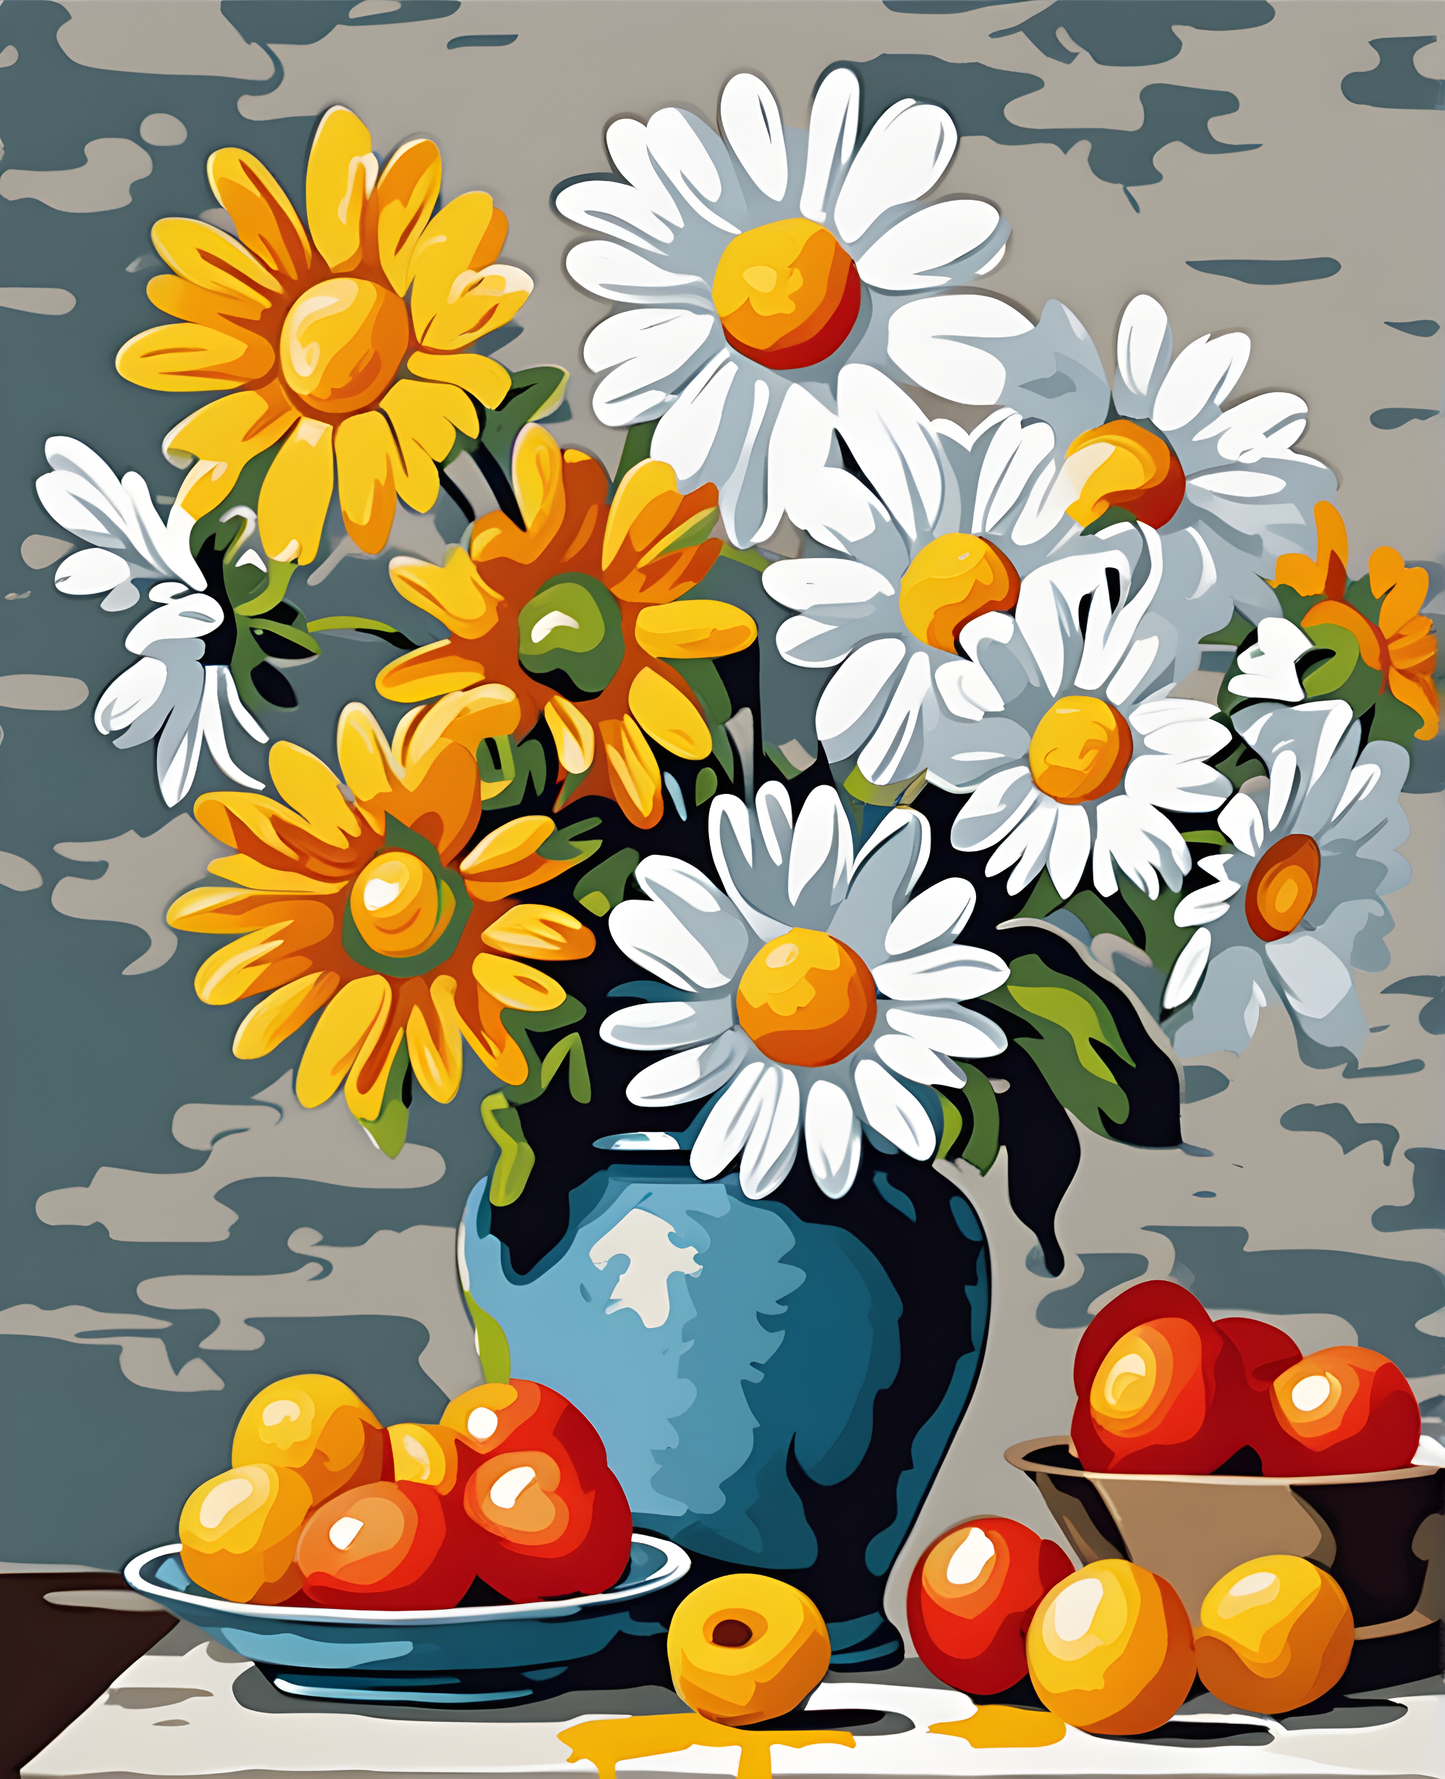 Flowers Collection OD (63) - Daisies - Van-Go Paint-By-Number Kit